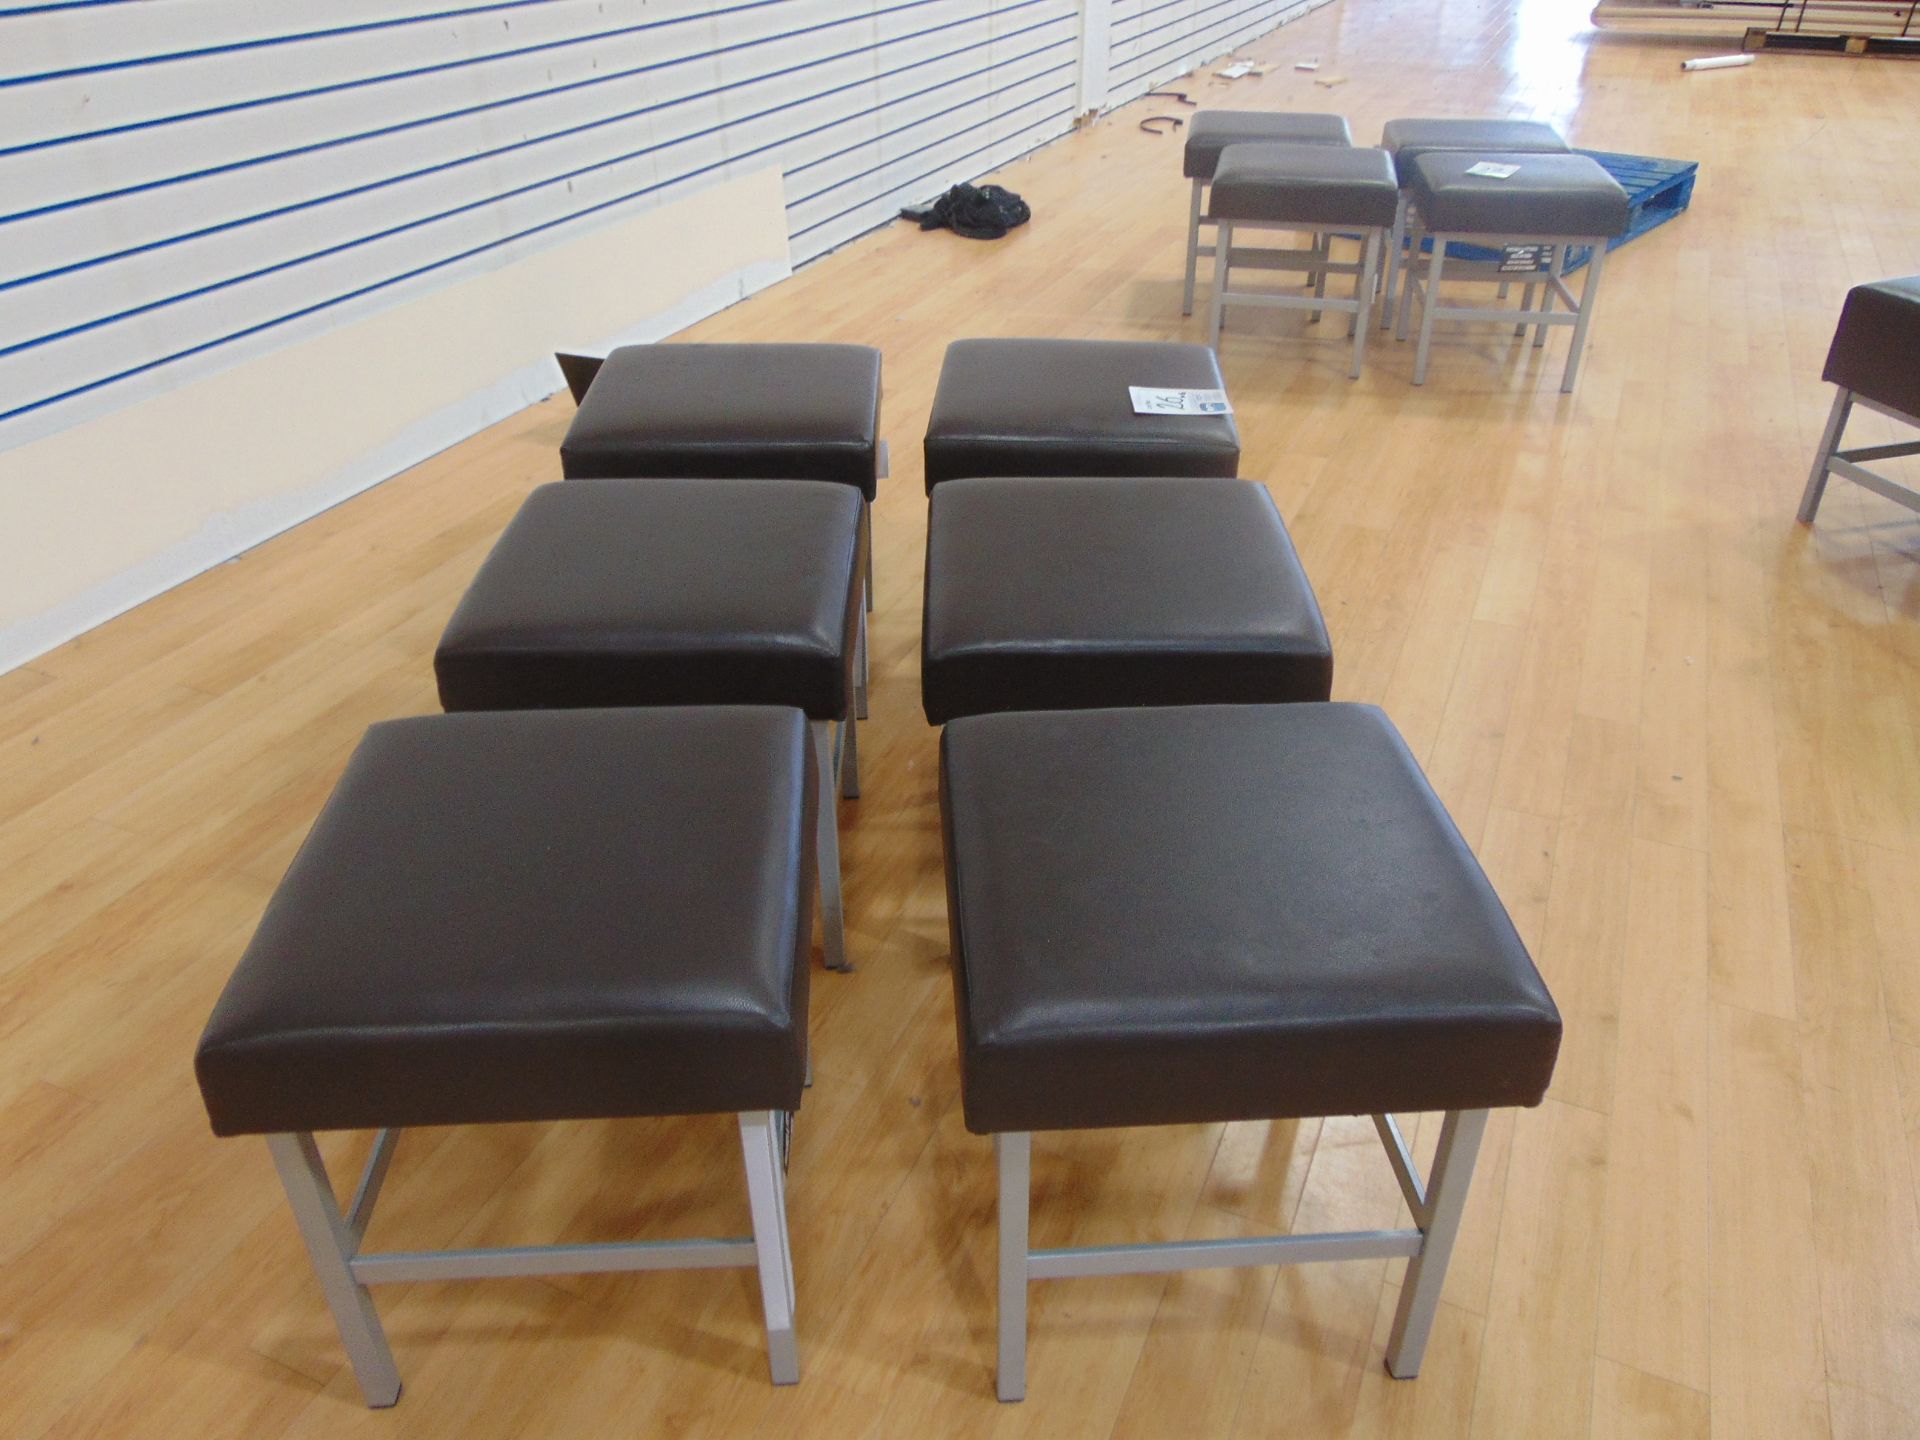 Quantity Of 6 Brown Leather Look Stools - Image 2 of 2